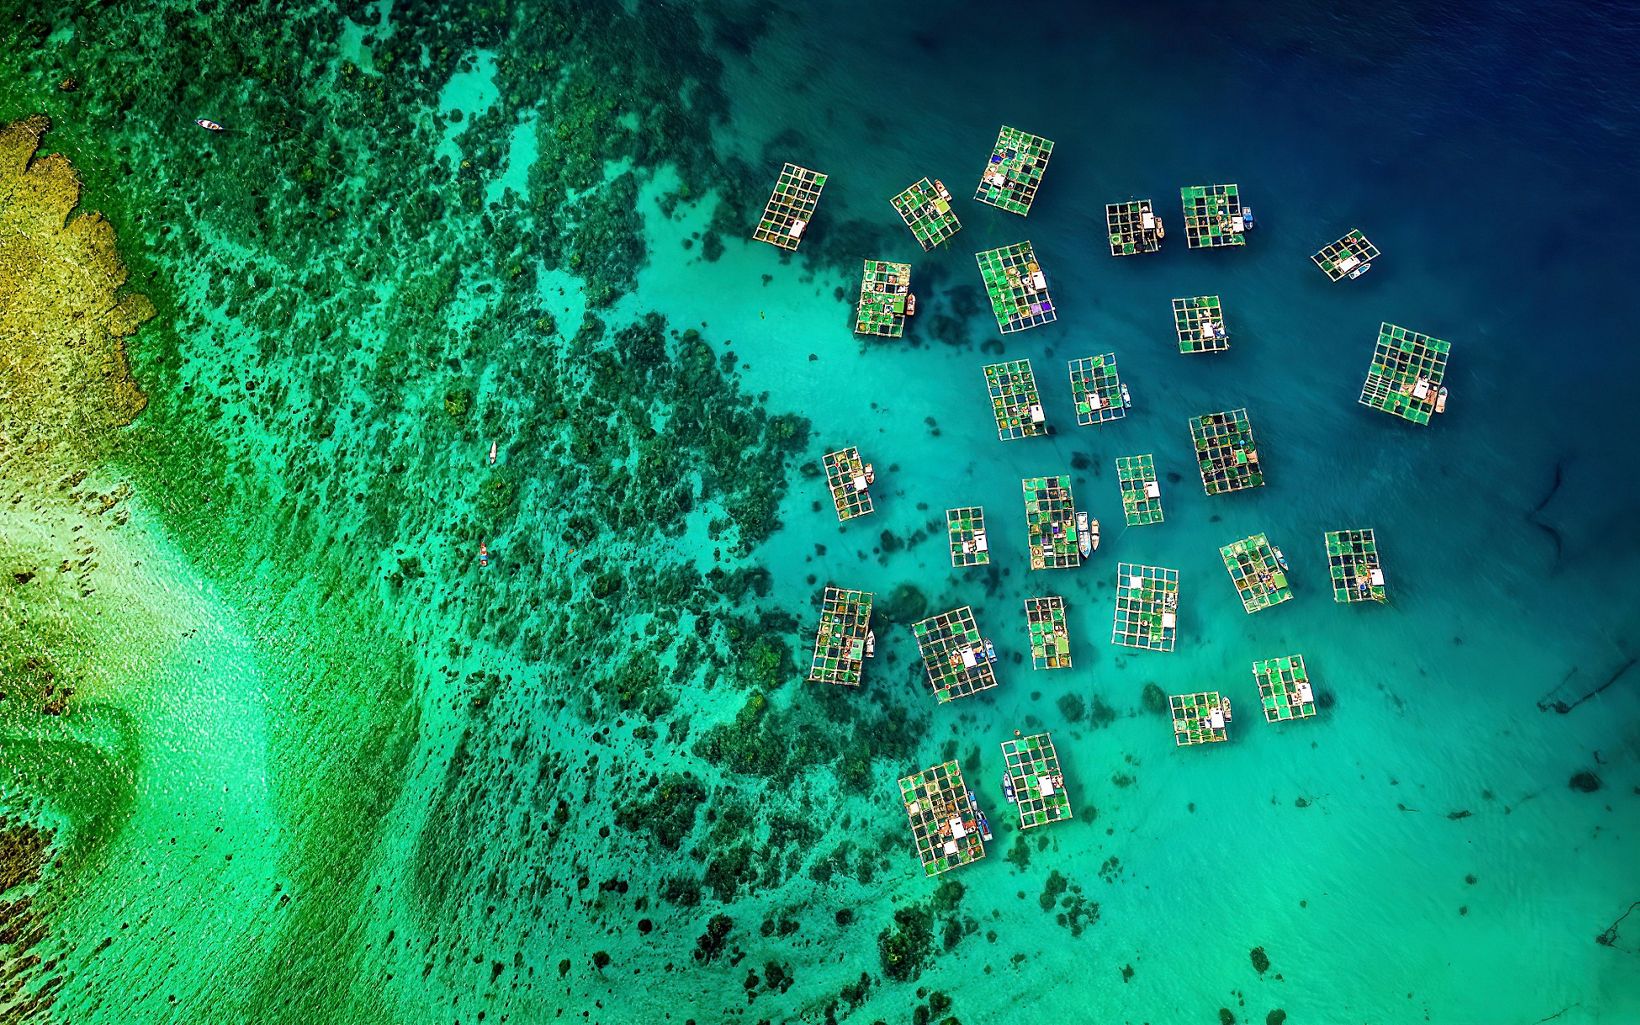 aerial view of green and blue island with small aquaculture structures in the water